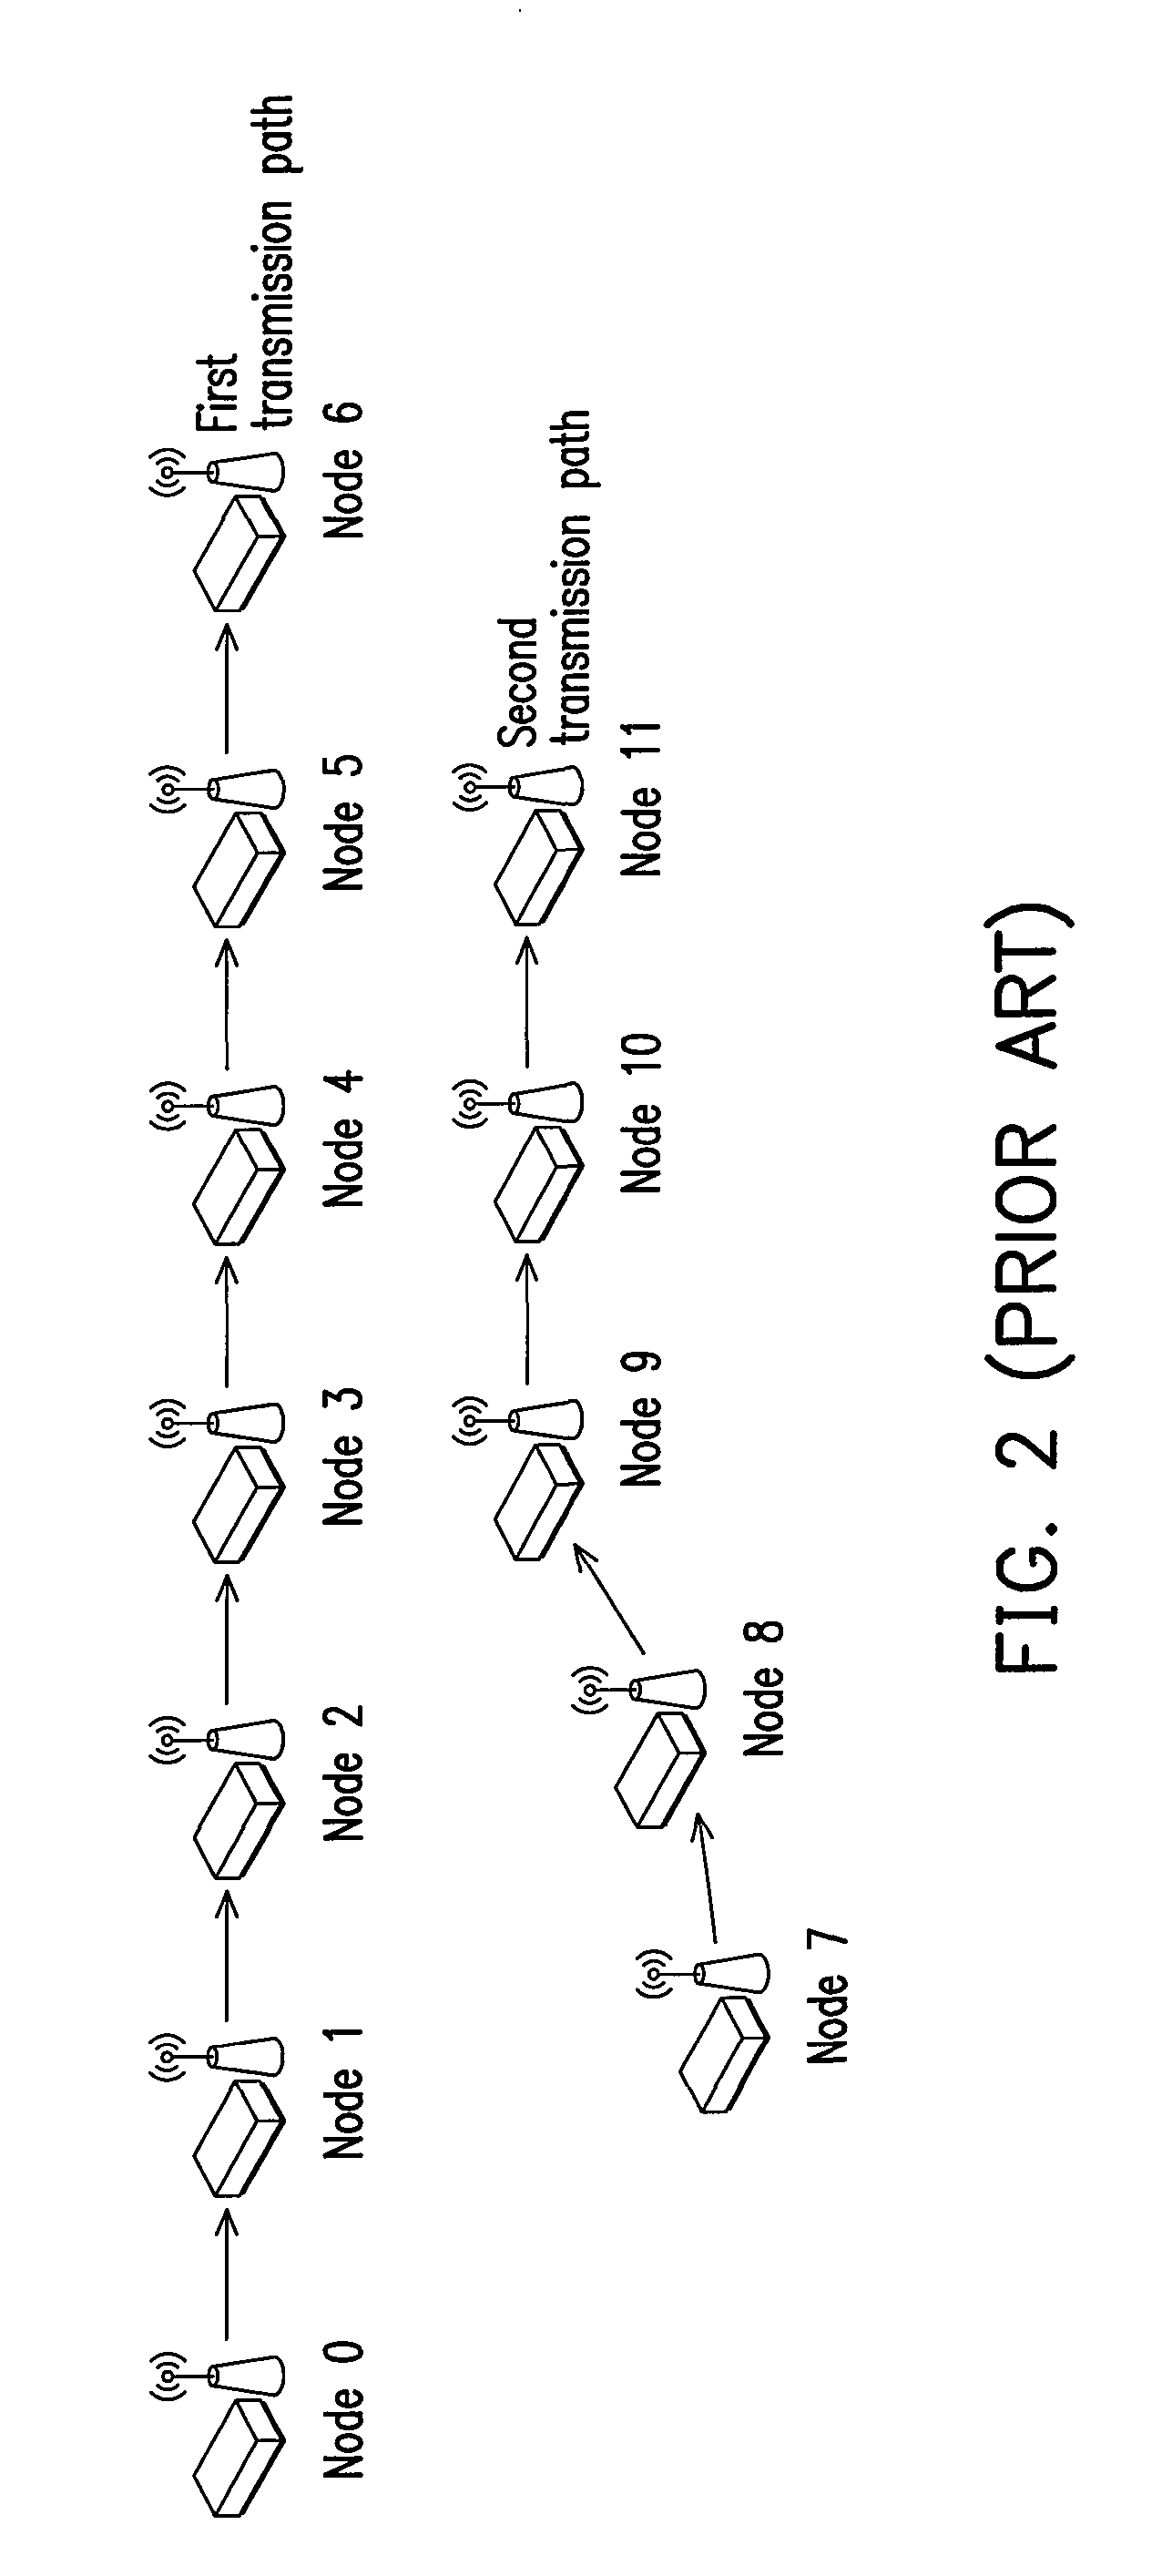 Distributed channel allocation method and wireless mesh network therewith